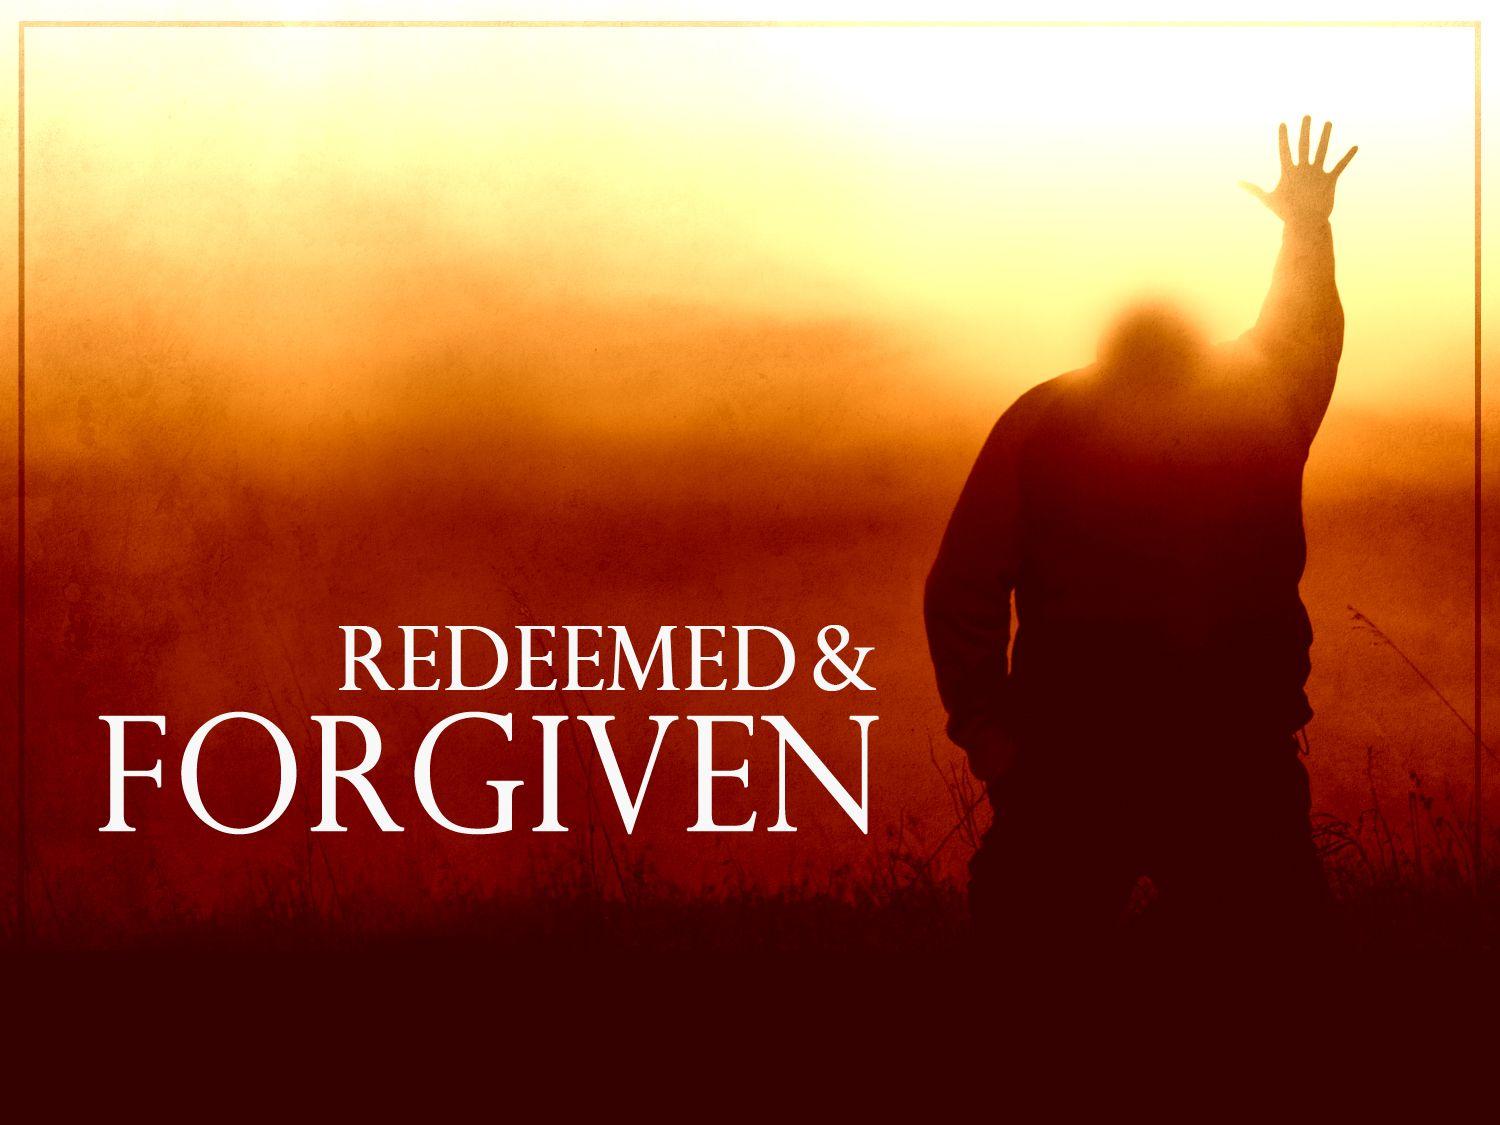 Easter Wallpaper  We Stand Forgiven at the Cross  Easter wallpaper  Wallpaper Free phone wallpaper